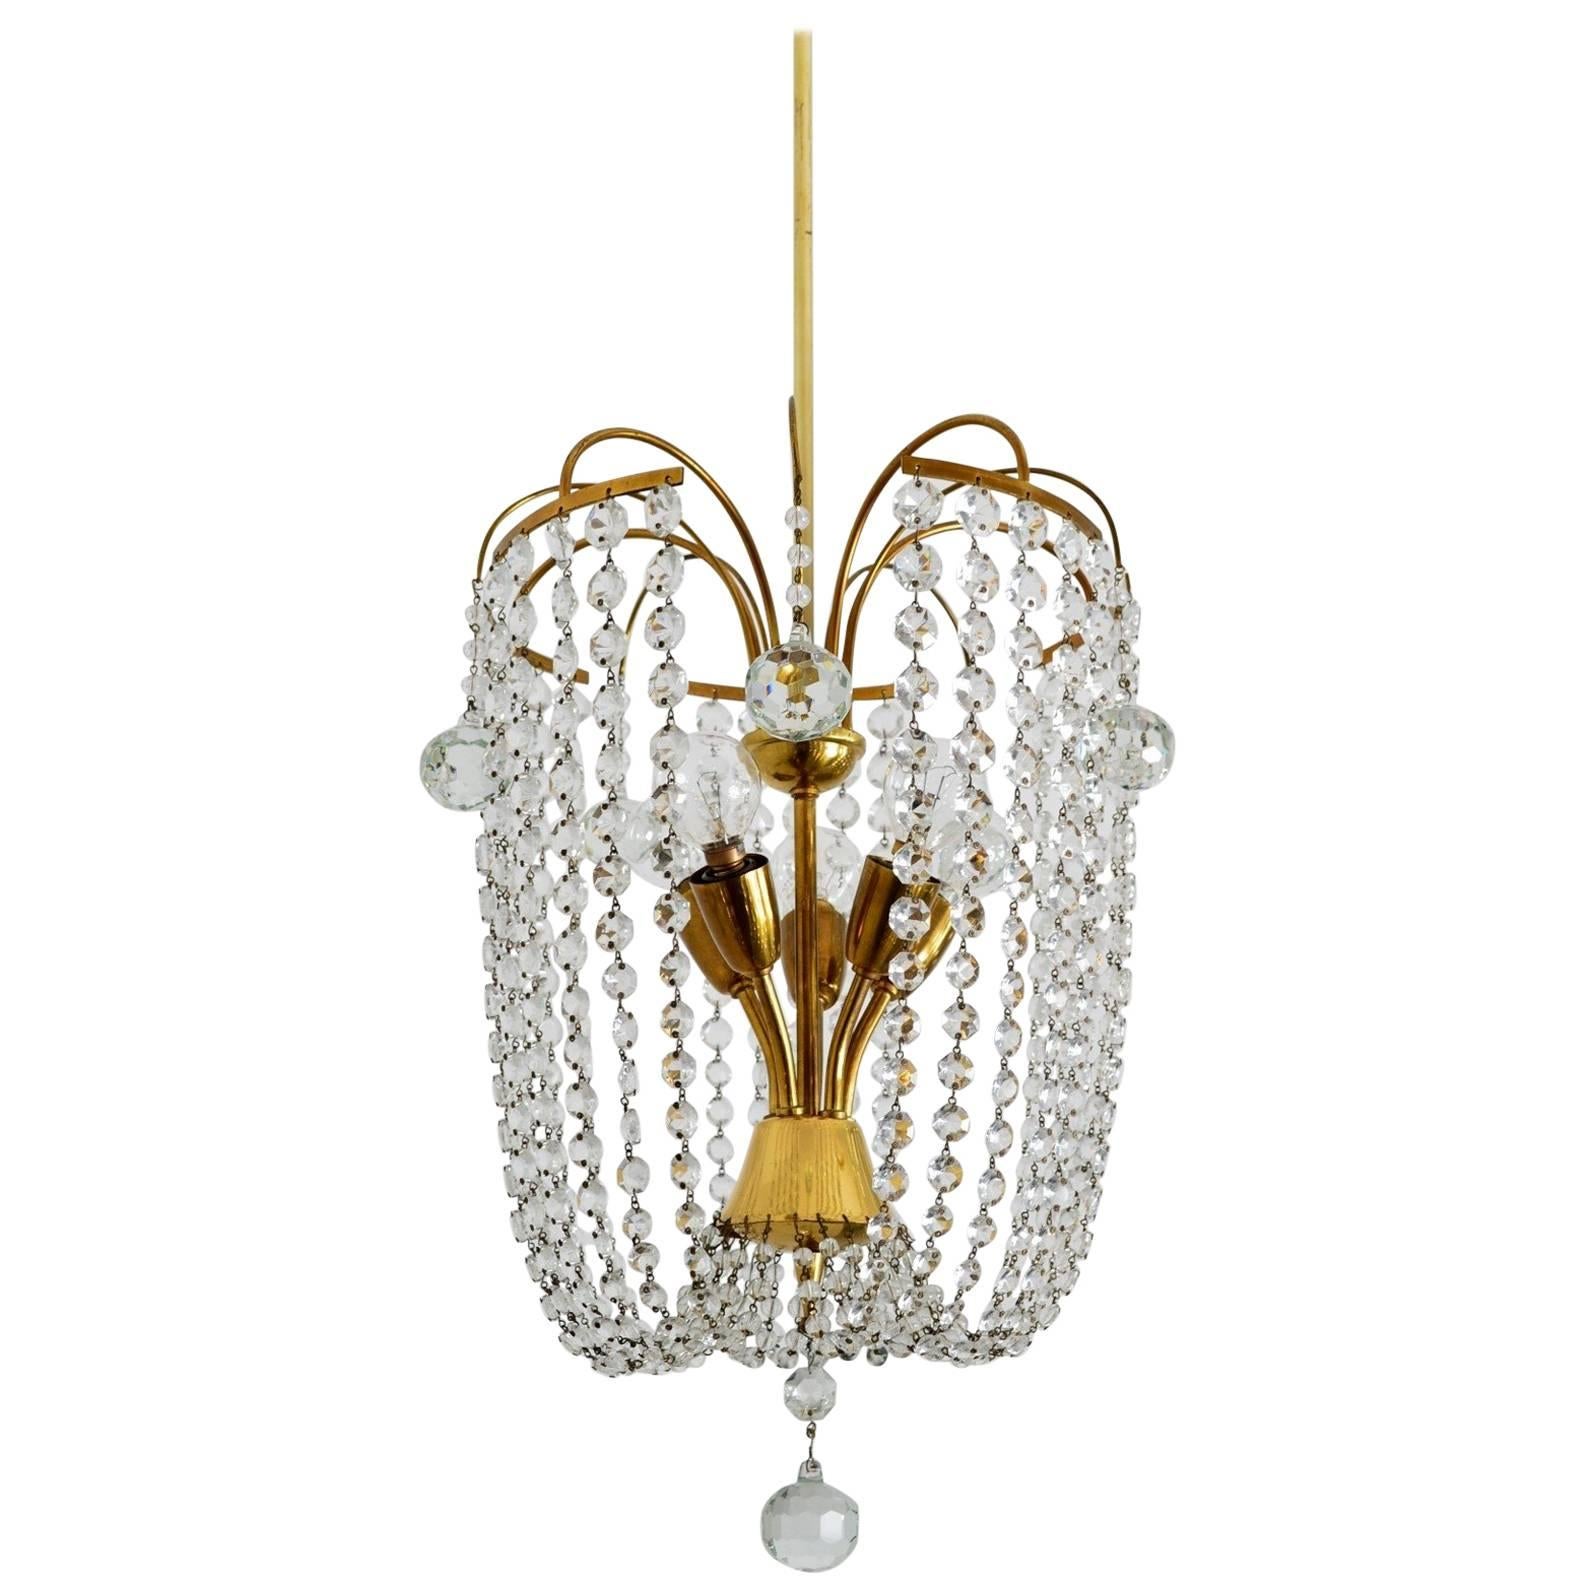 Austrian Midcentury Crystal Glass and Brass Chandelier, 1950s For Sale